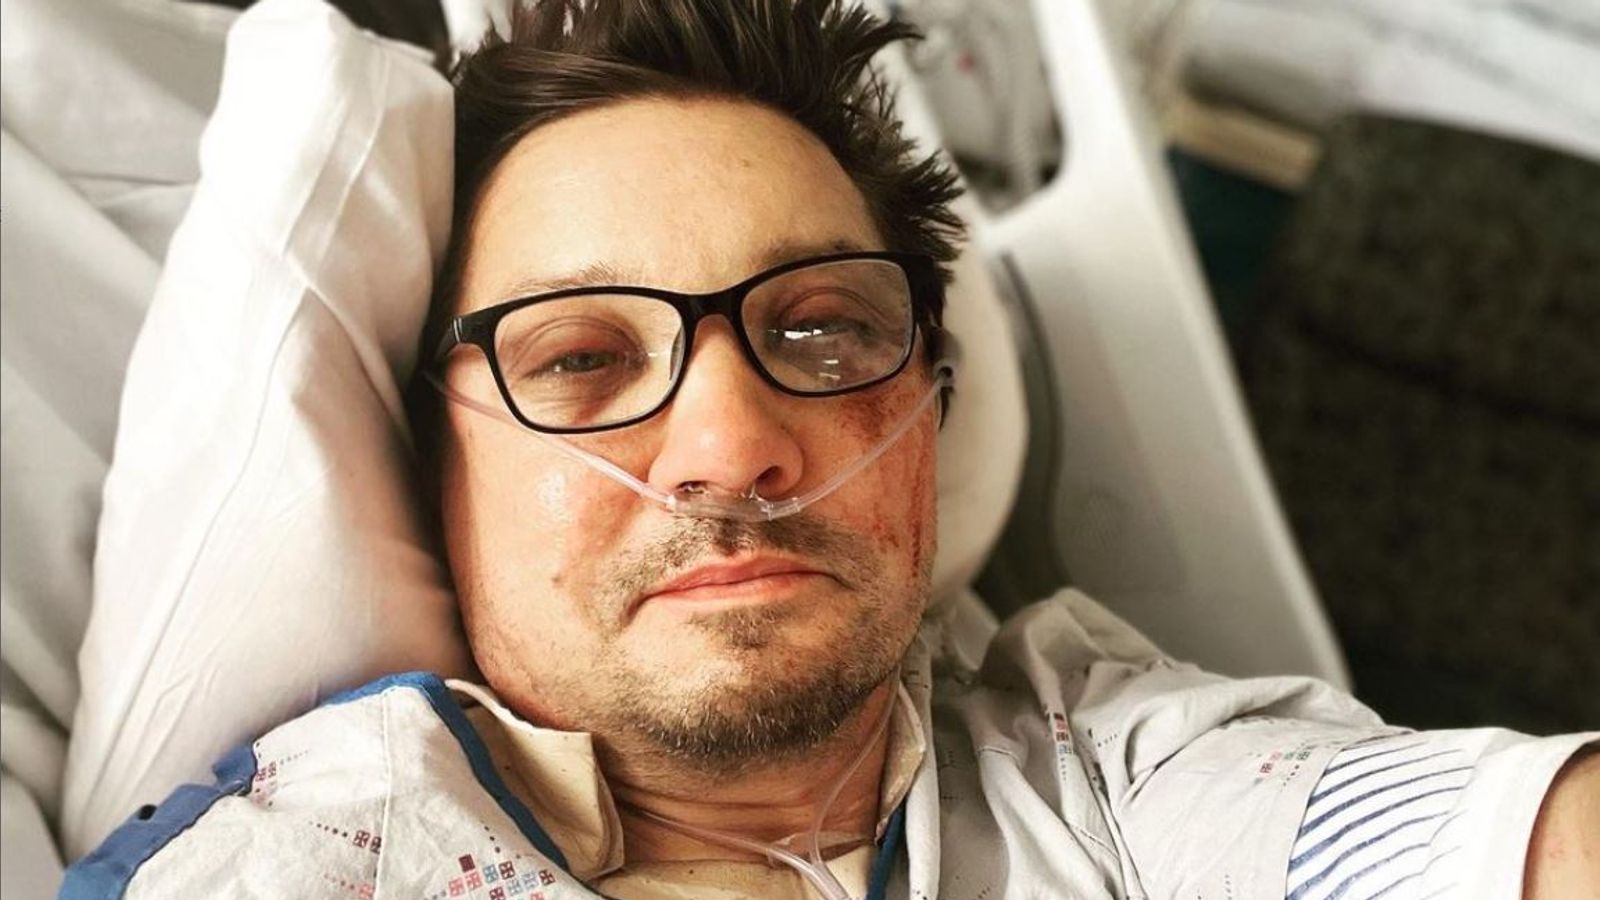 Jeremy Renner receives standing ovation after 'heck of a journey' since snowplough accident in Nevada